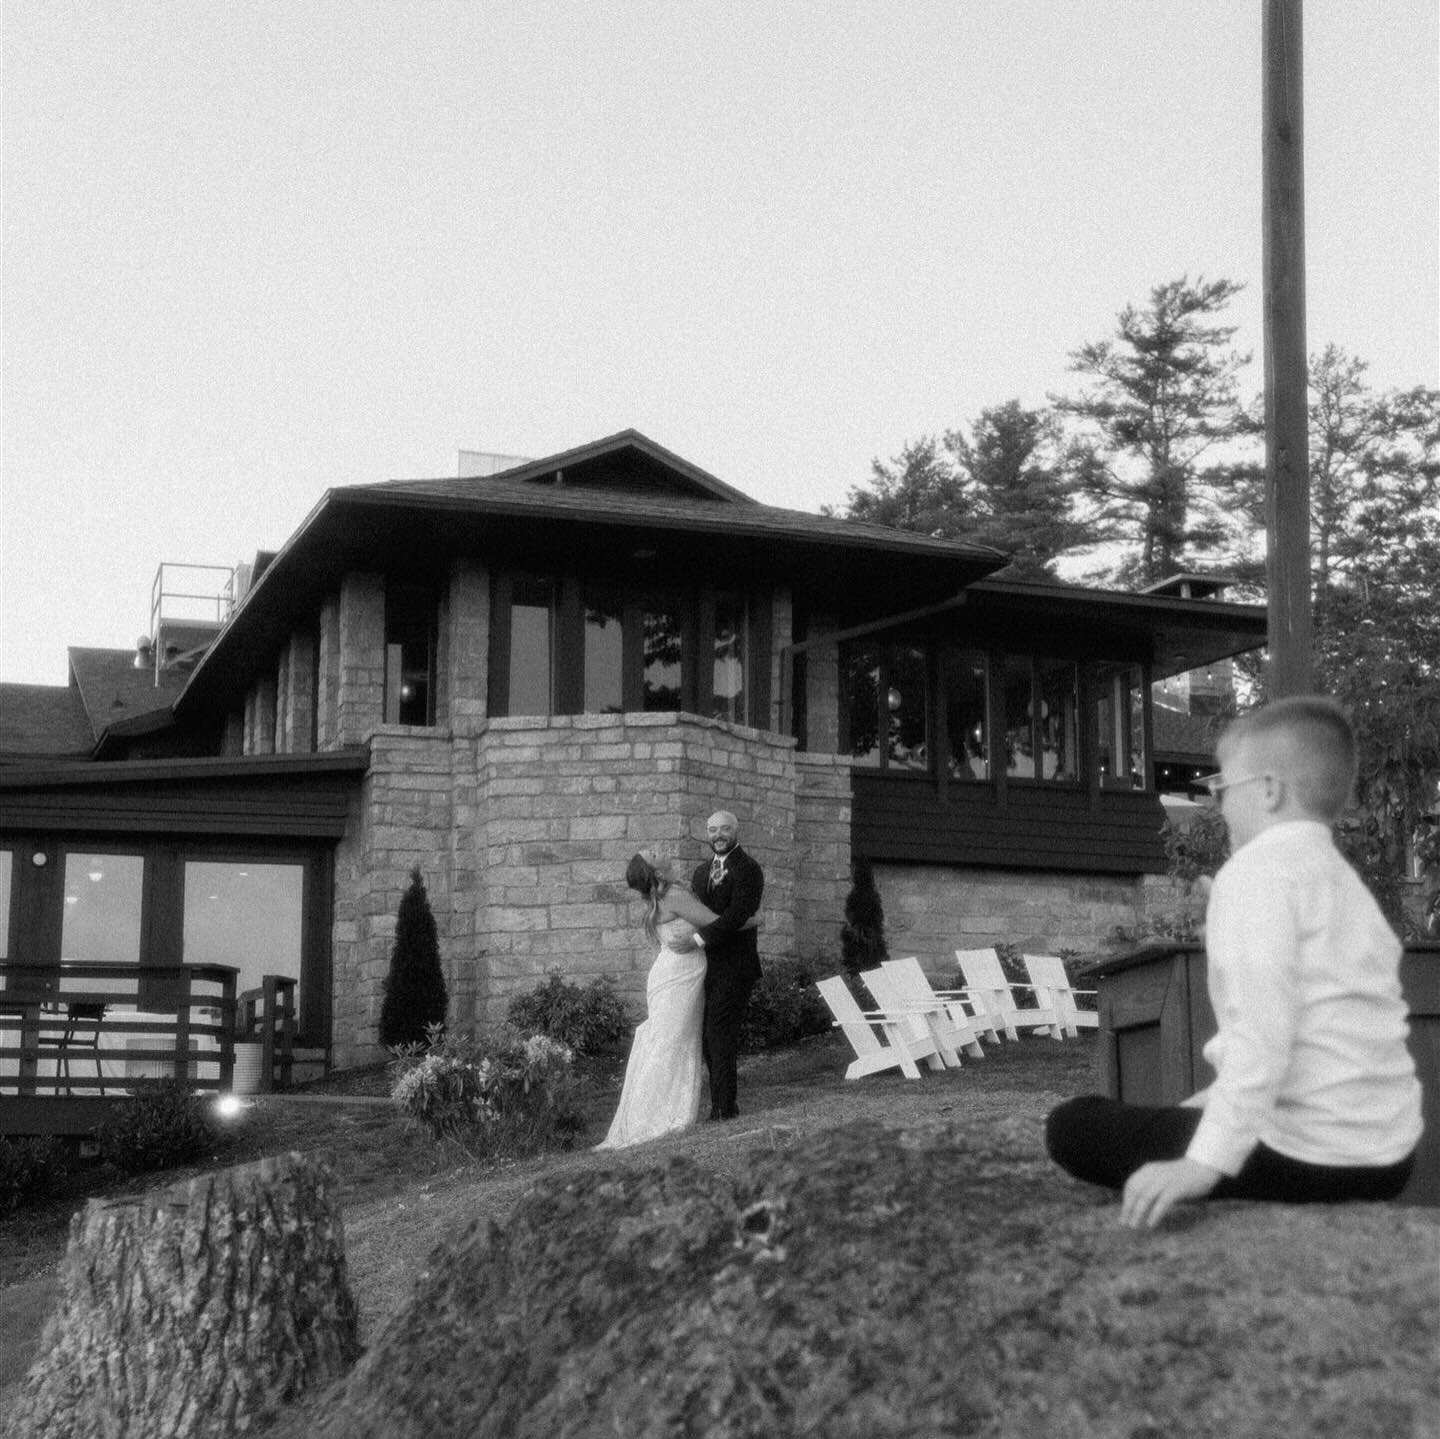 BW moments from C&amp;J wedding that deserve to be always remembered 🖤

Venue. @skylinelodgehighlands 
Florals. @crownheritageflowers 
Dress. @gretchensbridalgallery 
Suit. @menswearhouse 

#ashevilleweddingphotographer #skylinelodgehighlands #ncwed